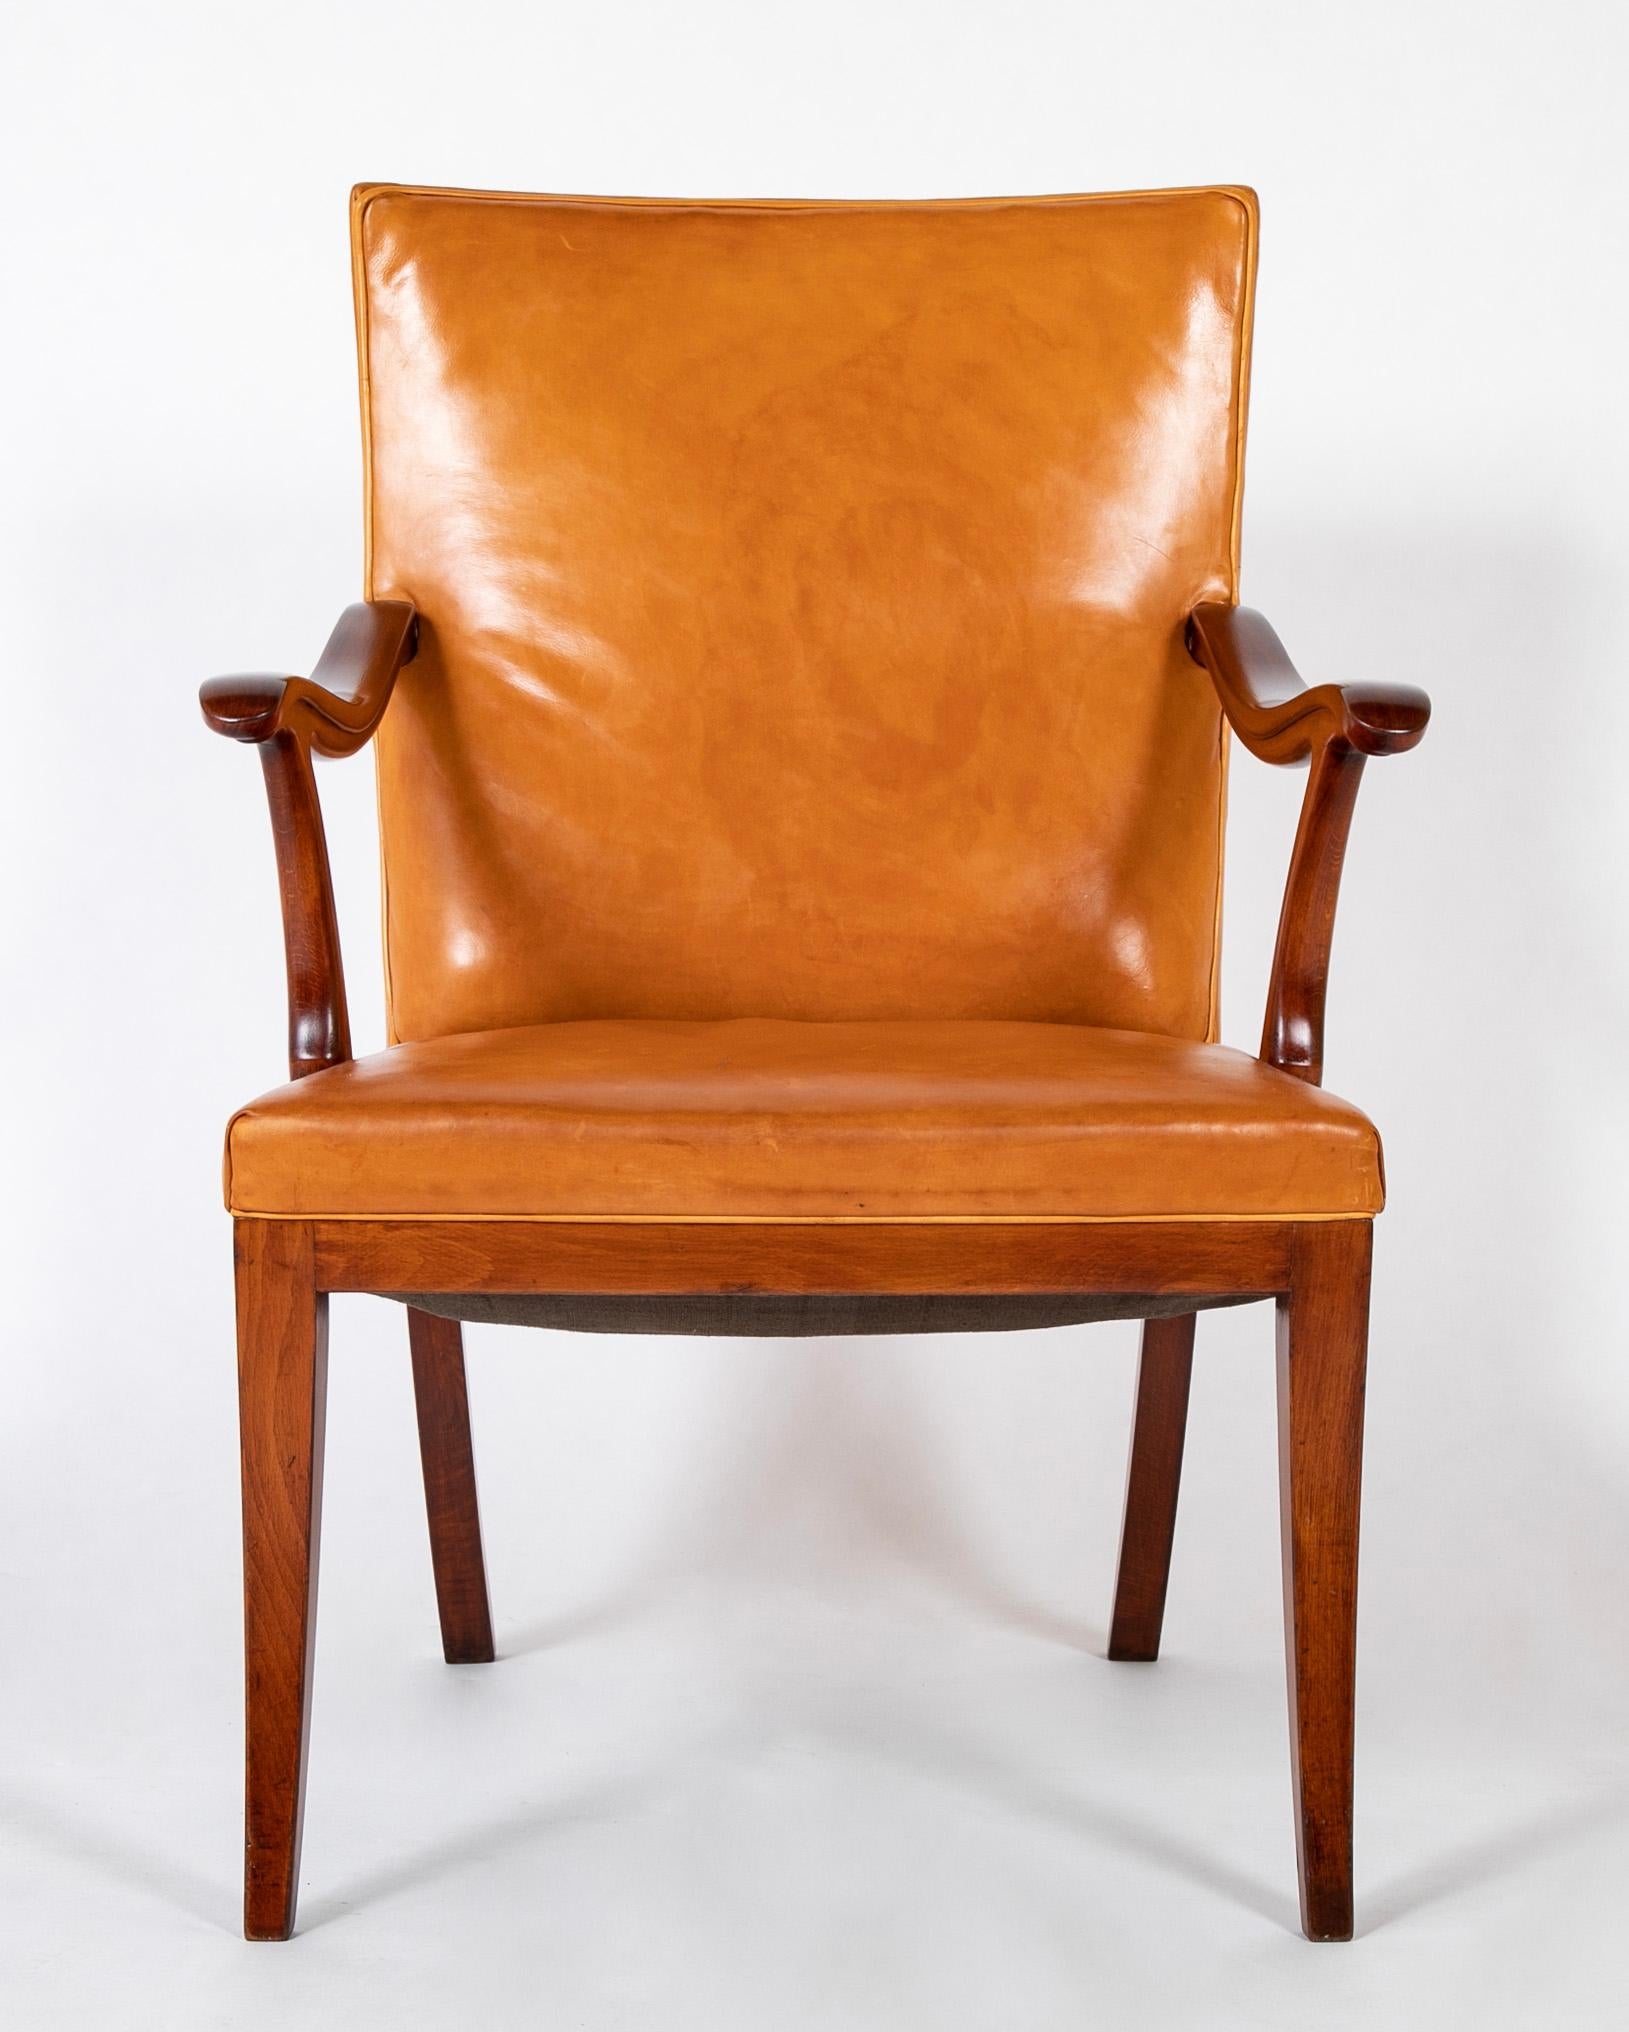 A Fritz Henningsen designed Cognac leather arm chair in stained Beech.  Produced in Denmark circa 1949.